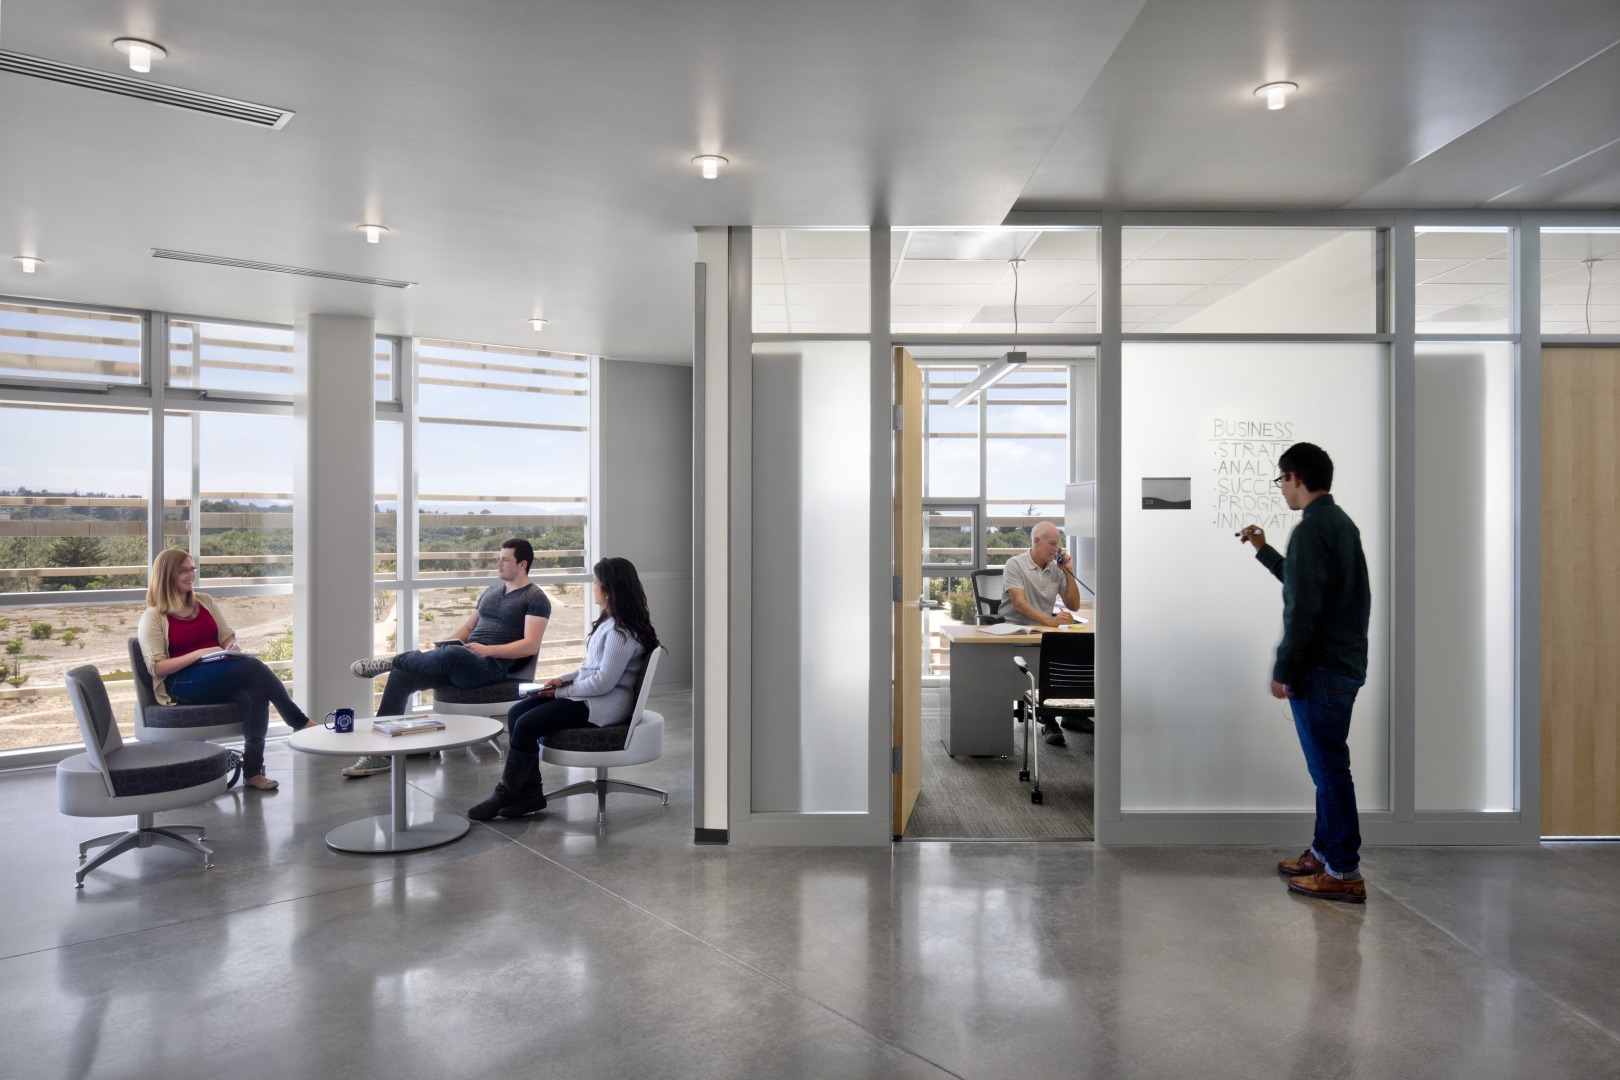 Office architecture concepts rely on location and navigation.